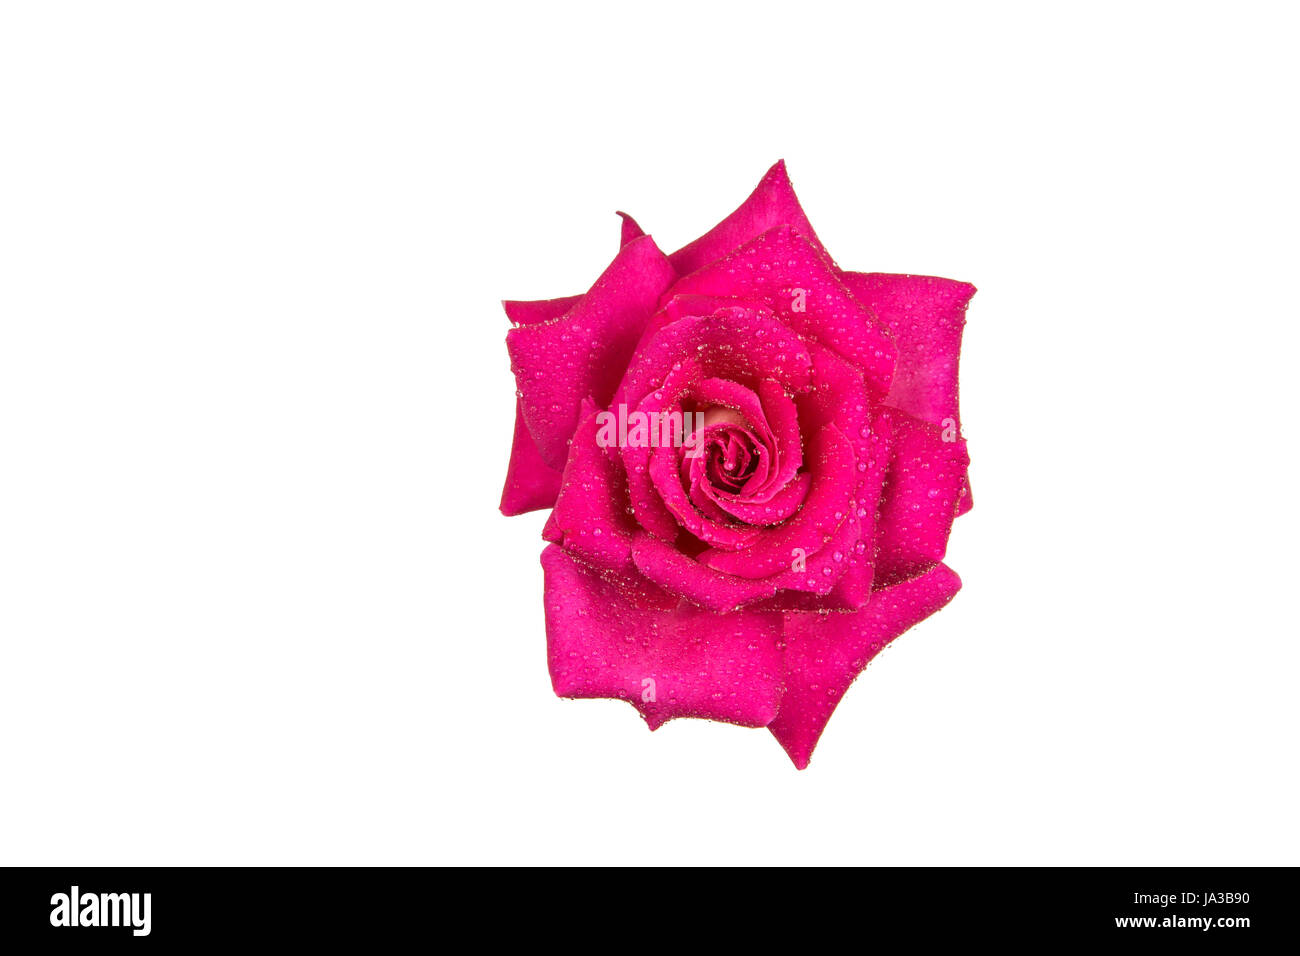 flower, plant, rose, apart, extra, insulated, water, pink, drop, drip, drops, Stock Photo